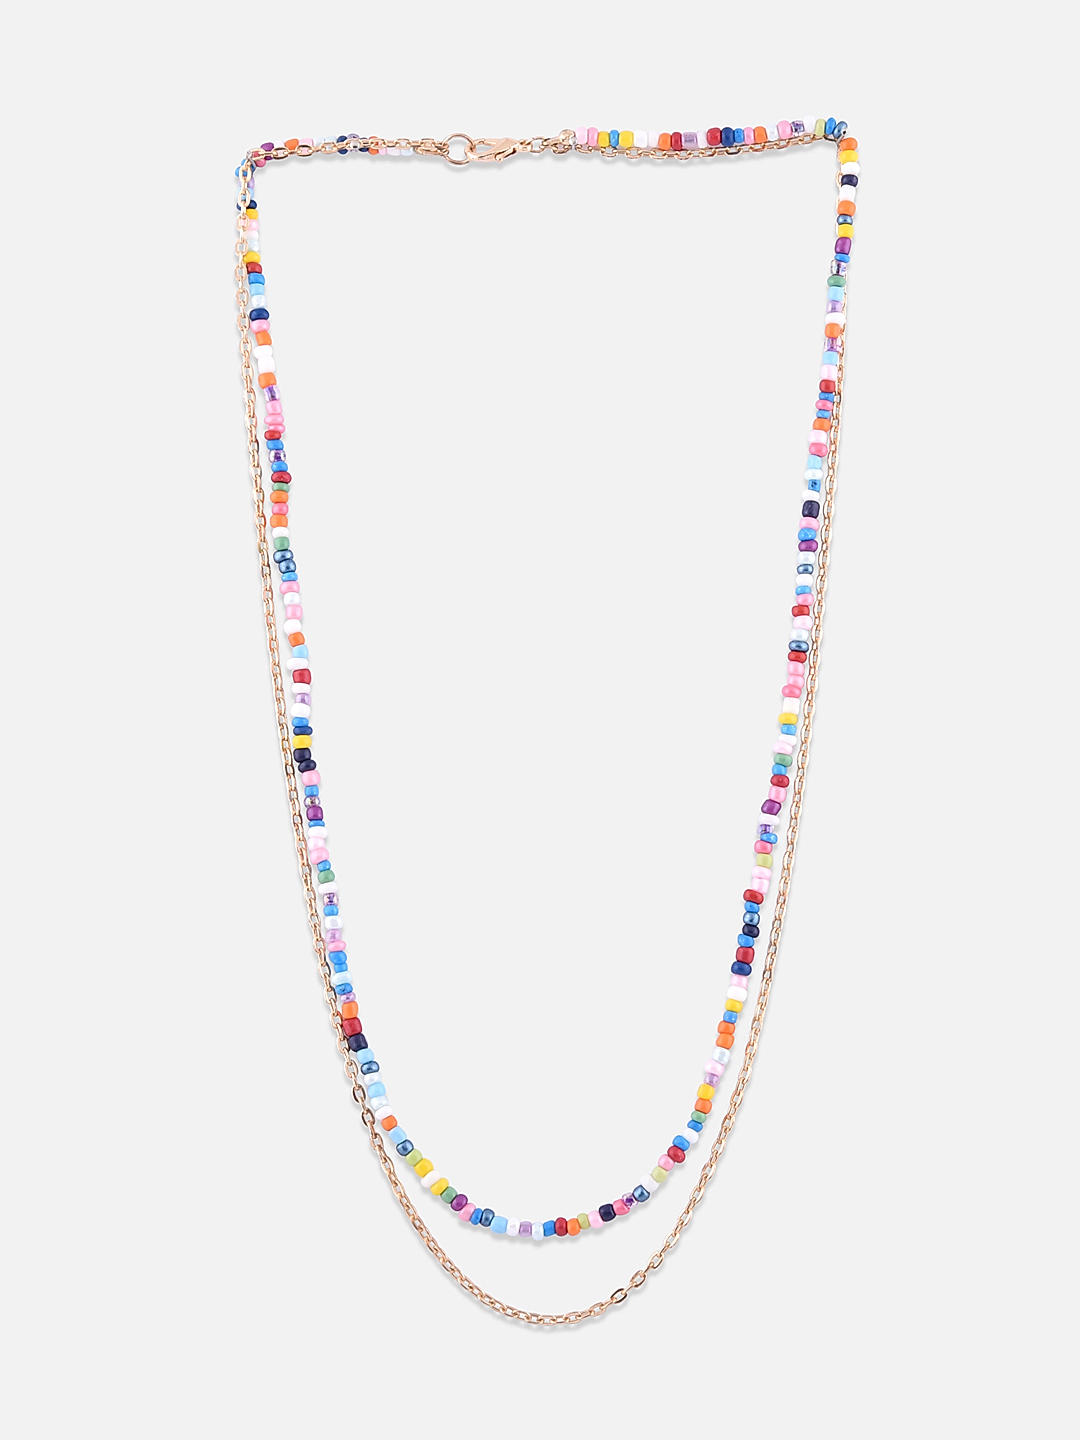 Glass Beaded Necklace- Silver/Gold Multicolor (Big Beads) – 3 Girls Gifts